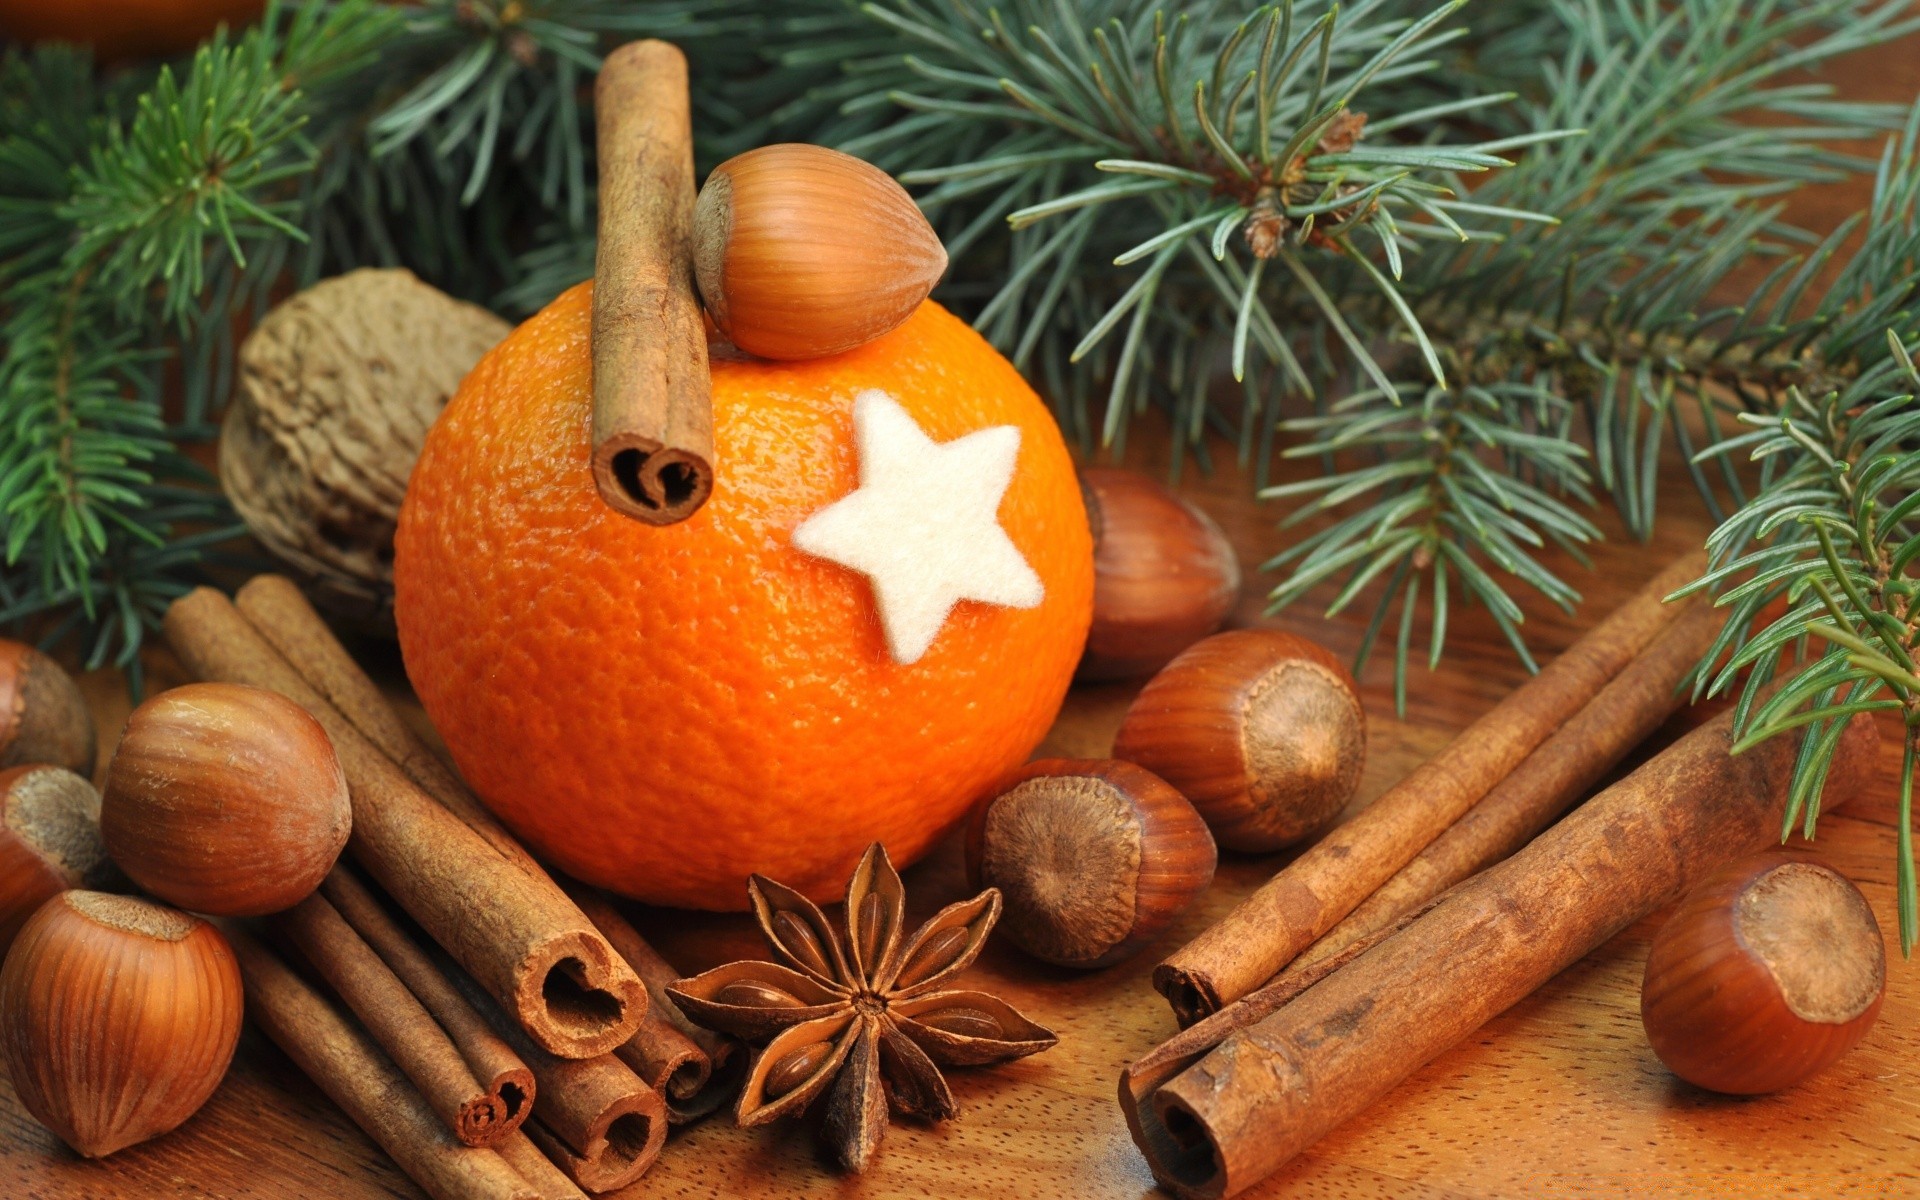 fruit christmas cinnamon food wood wooden spice winter advent group aromatic table anise rustic apple decoration stick cooking close-up